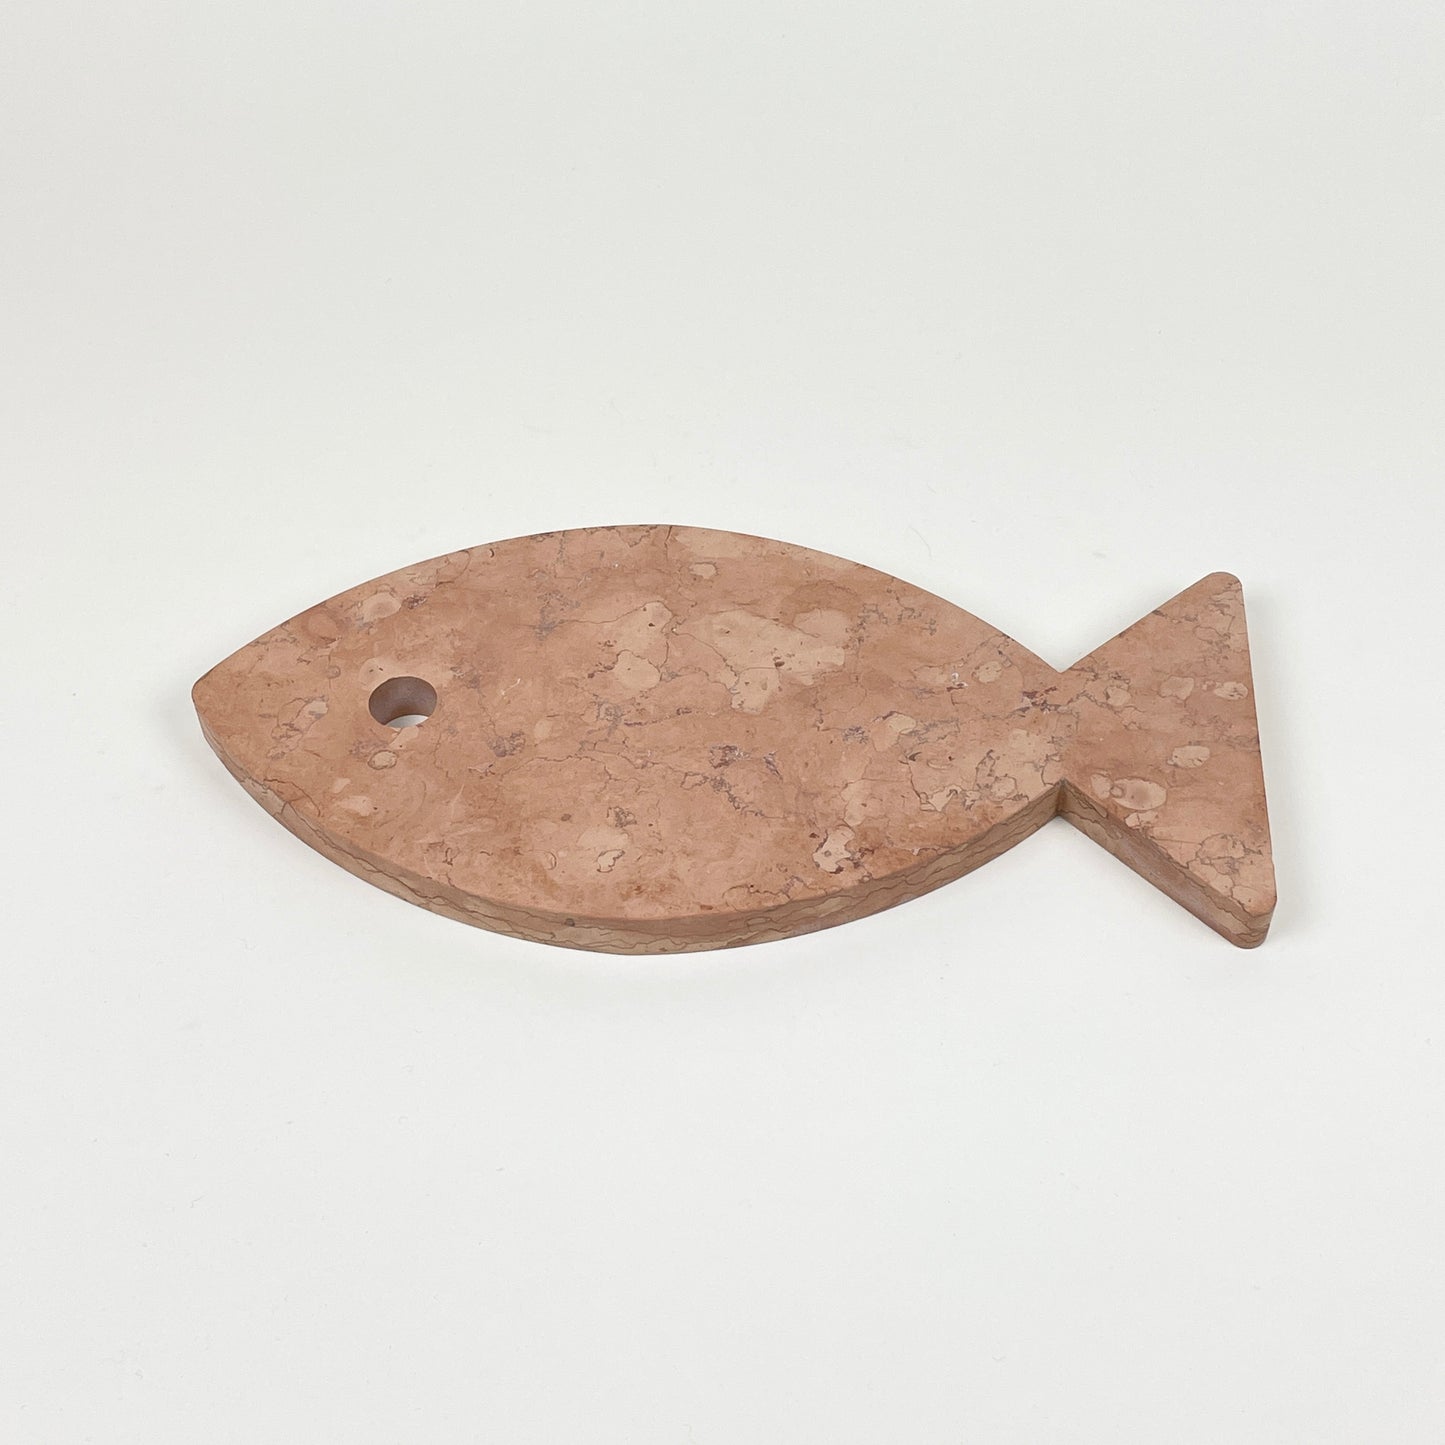 Marble fish by Public Studio, pink